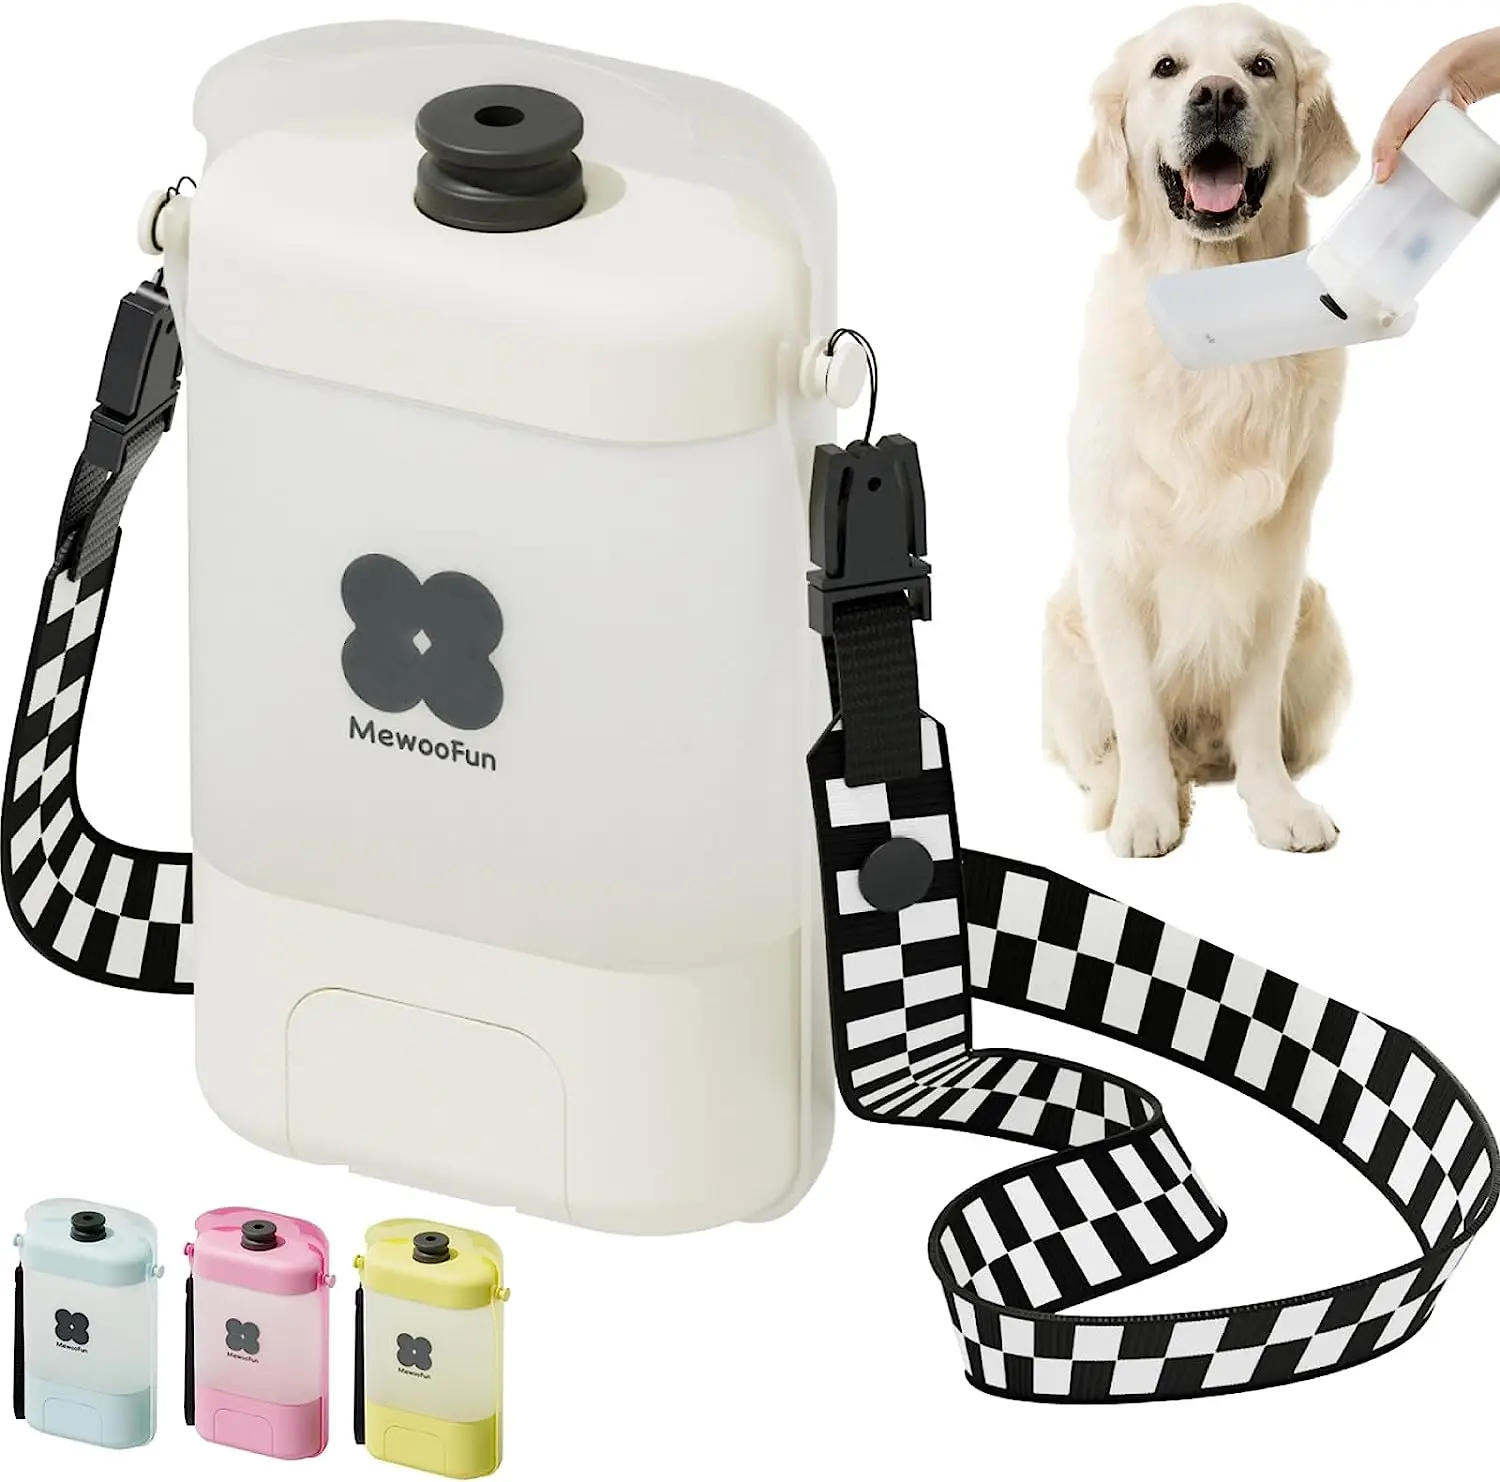 

New Pet Water Bottle for Dogs and Cats Portable Convenient Safe Tasteless Drinking Leak-Proof Water Dispenser on The Go